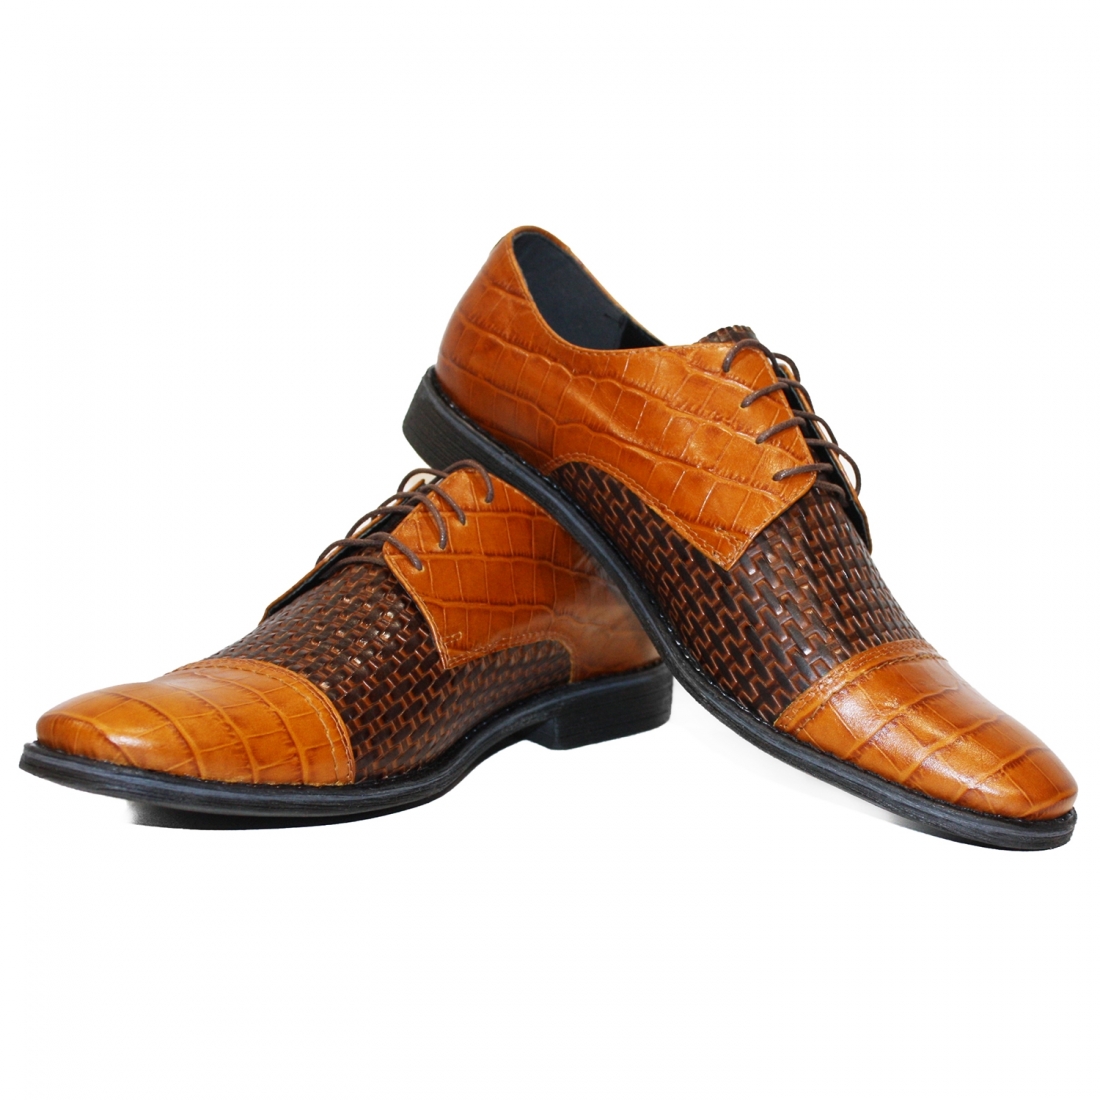 Modello Gutersso - Schnürer - Handmade Colorful Italian Leather Shoes